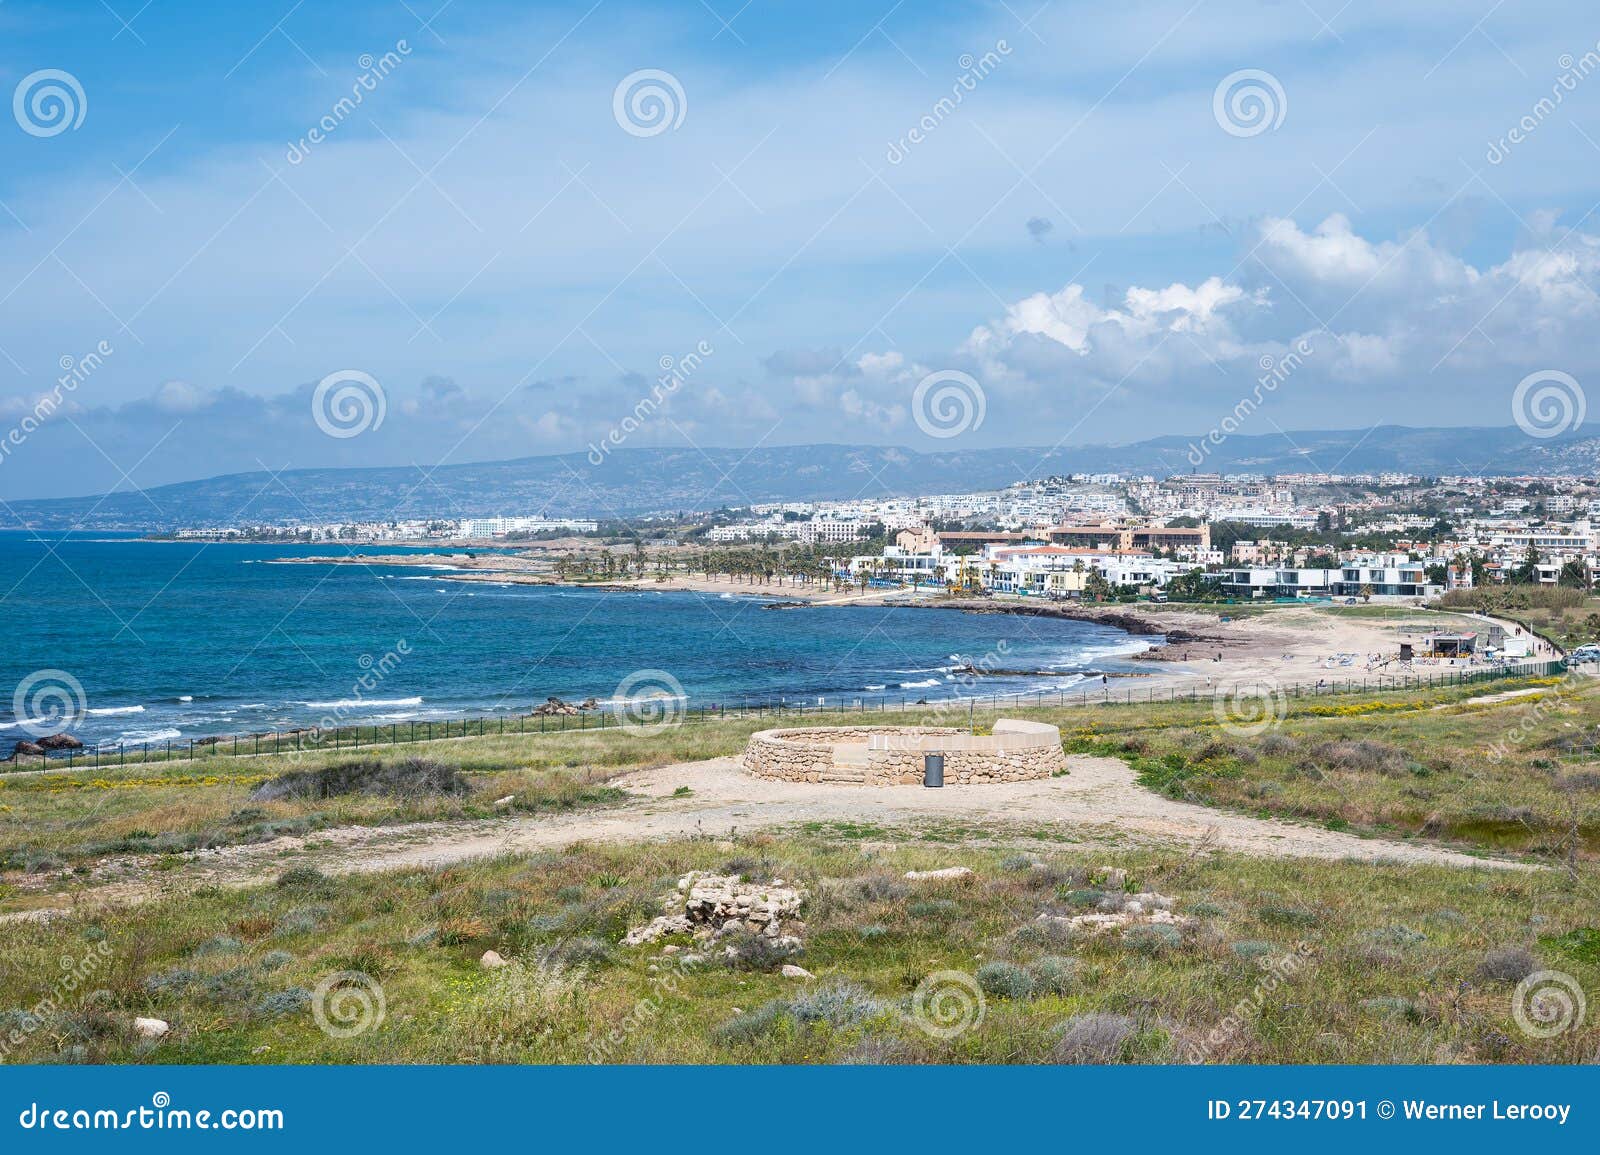 paphos, paphos district, cyprus - high angle view from the fabrica hill over the bay of paphos